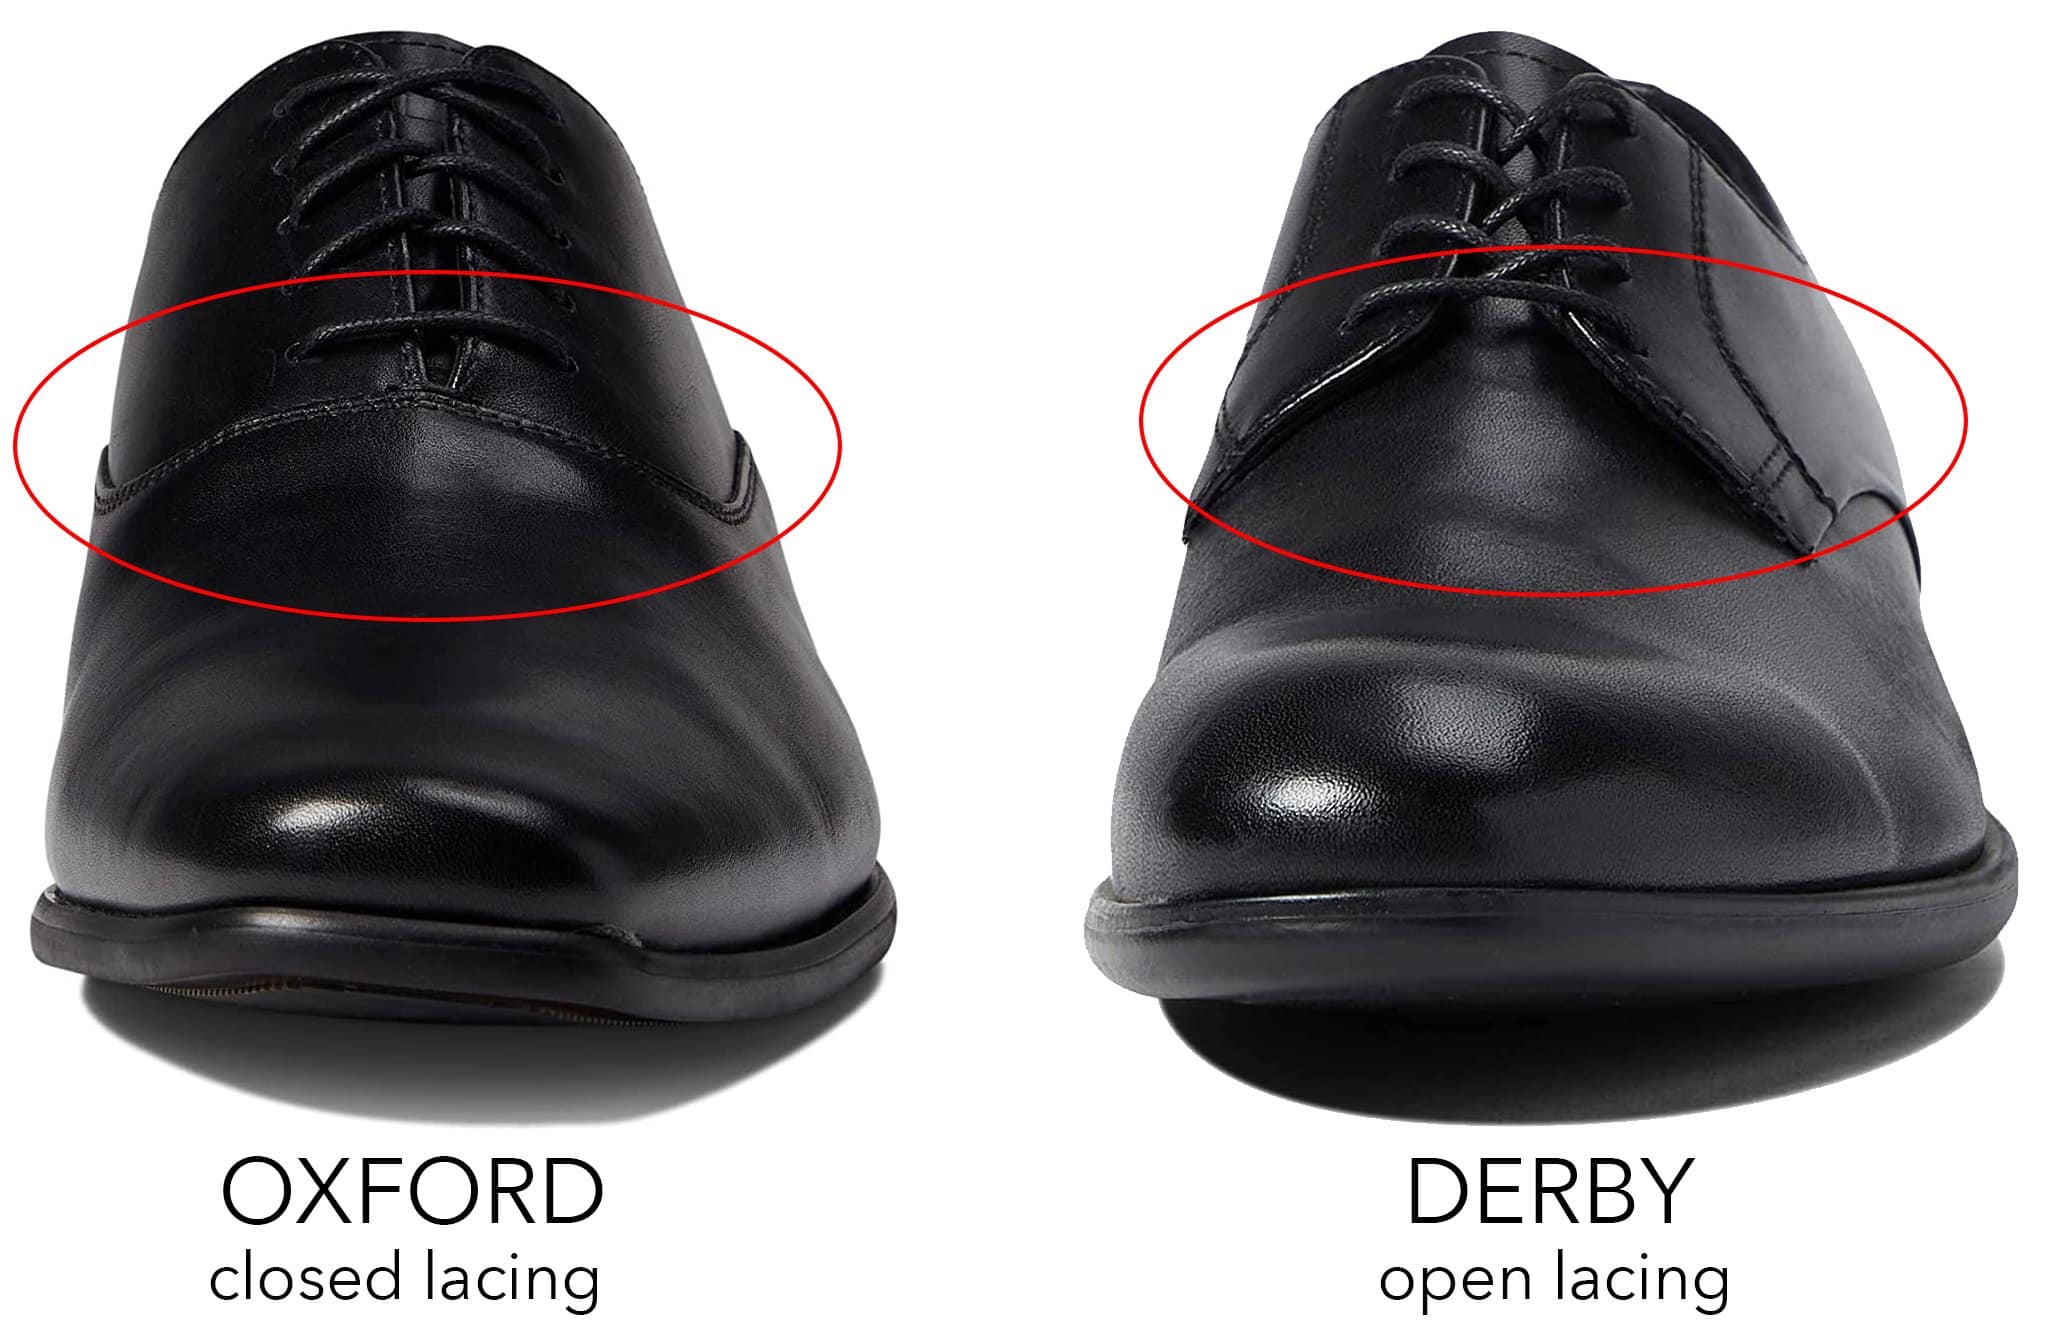 How to Tell Difference Between Oxfords and Brogues and Derby Shoes